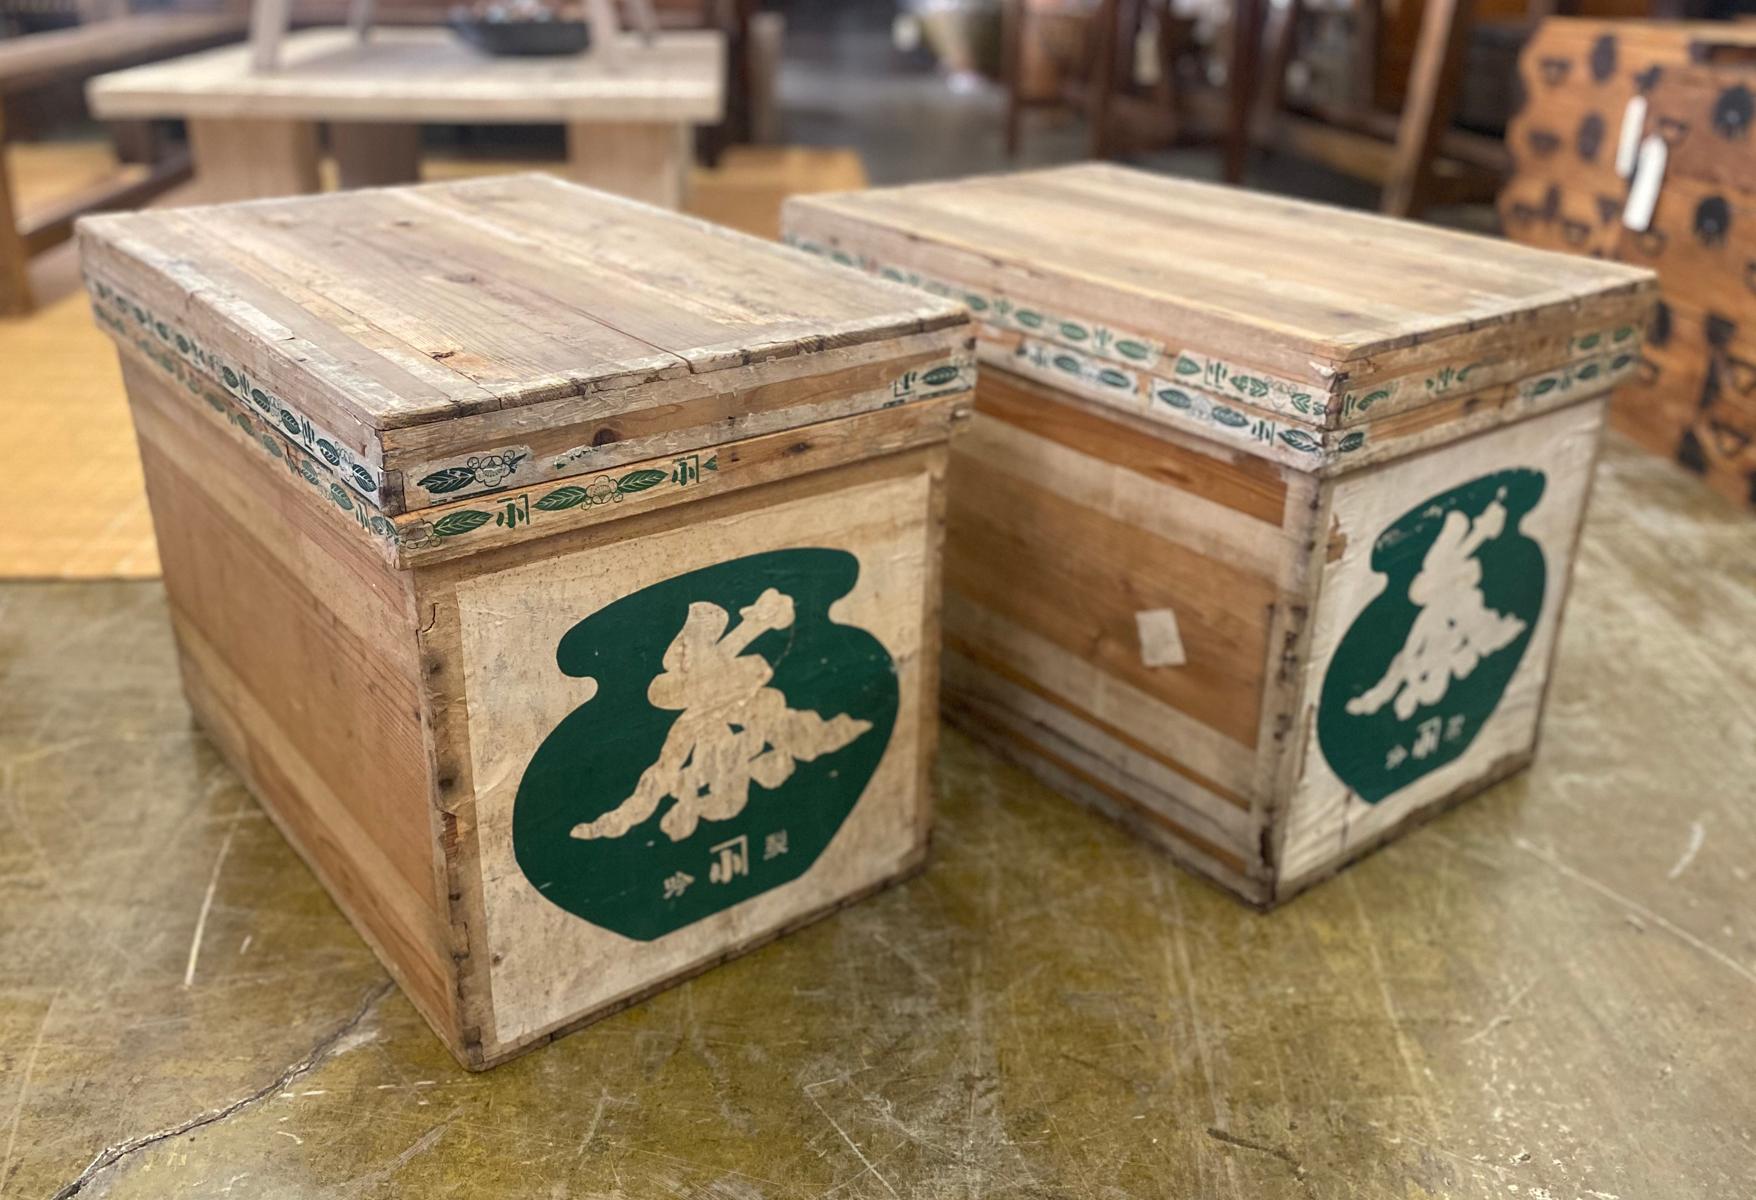 These tea boxes were lined with tin to keep loose tea fresh. One has the original tin, the other has been replaced with new tin. They each have old sticker, labels and a lot of character. They are functional as a rustic coffee table, side table or